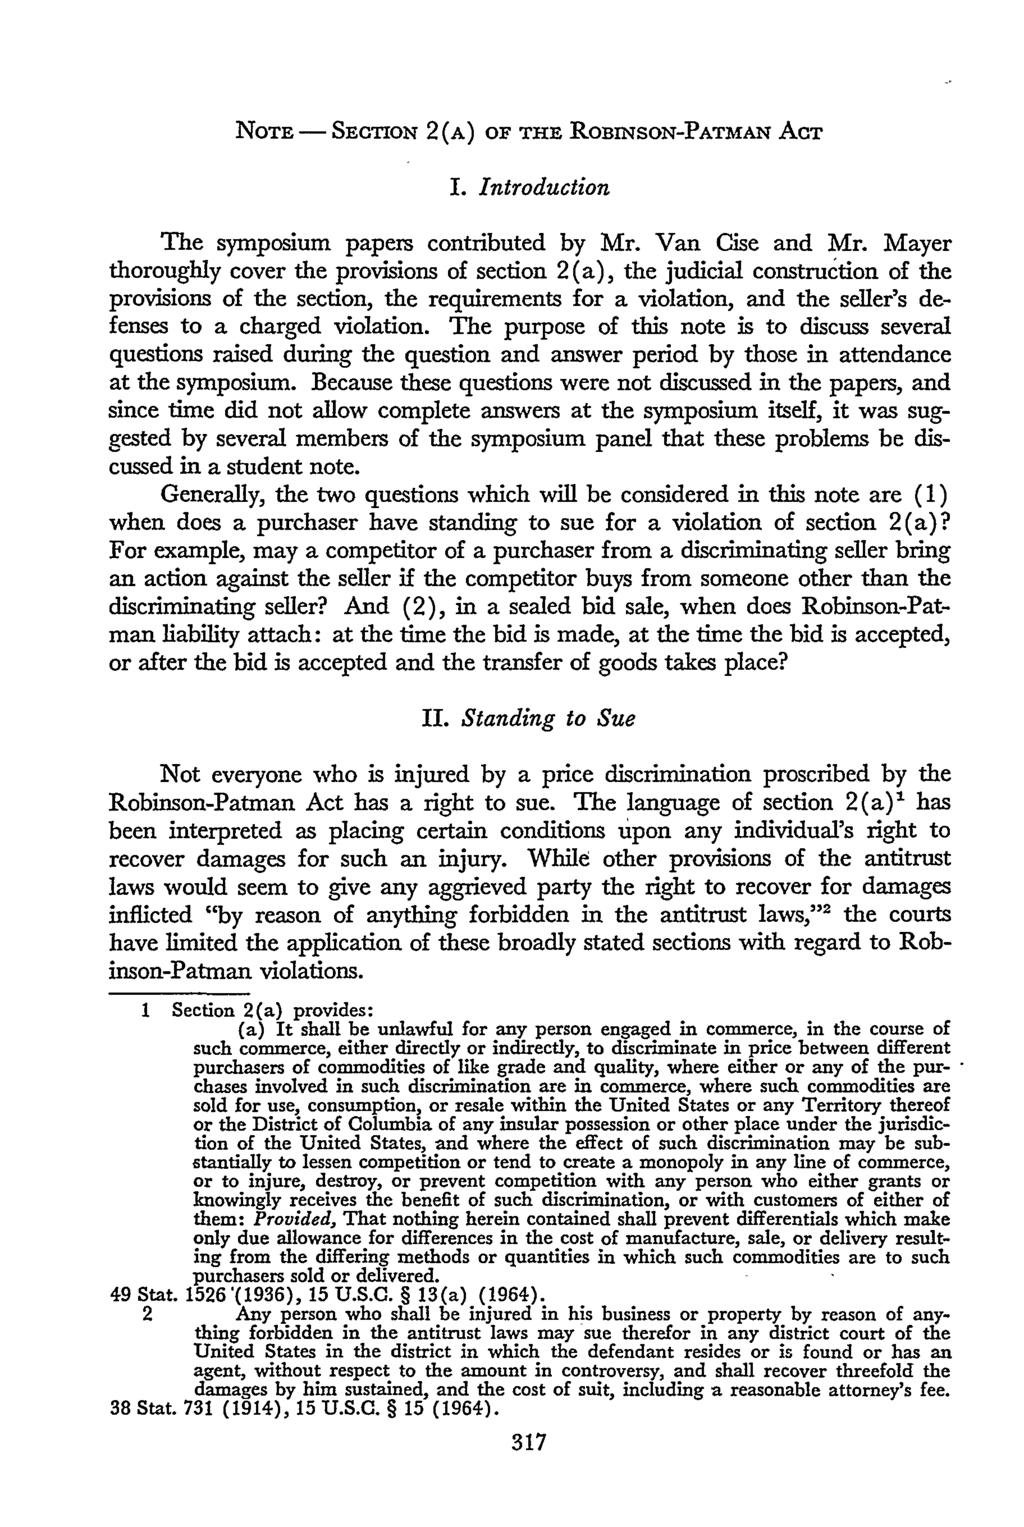 NOTE - SECTION 2 (A) OF THE ROBINSON-PATMAN ACT I. Introduction The symposium papers contributed by Mr. Van Cise and Mr.